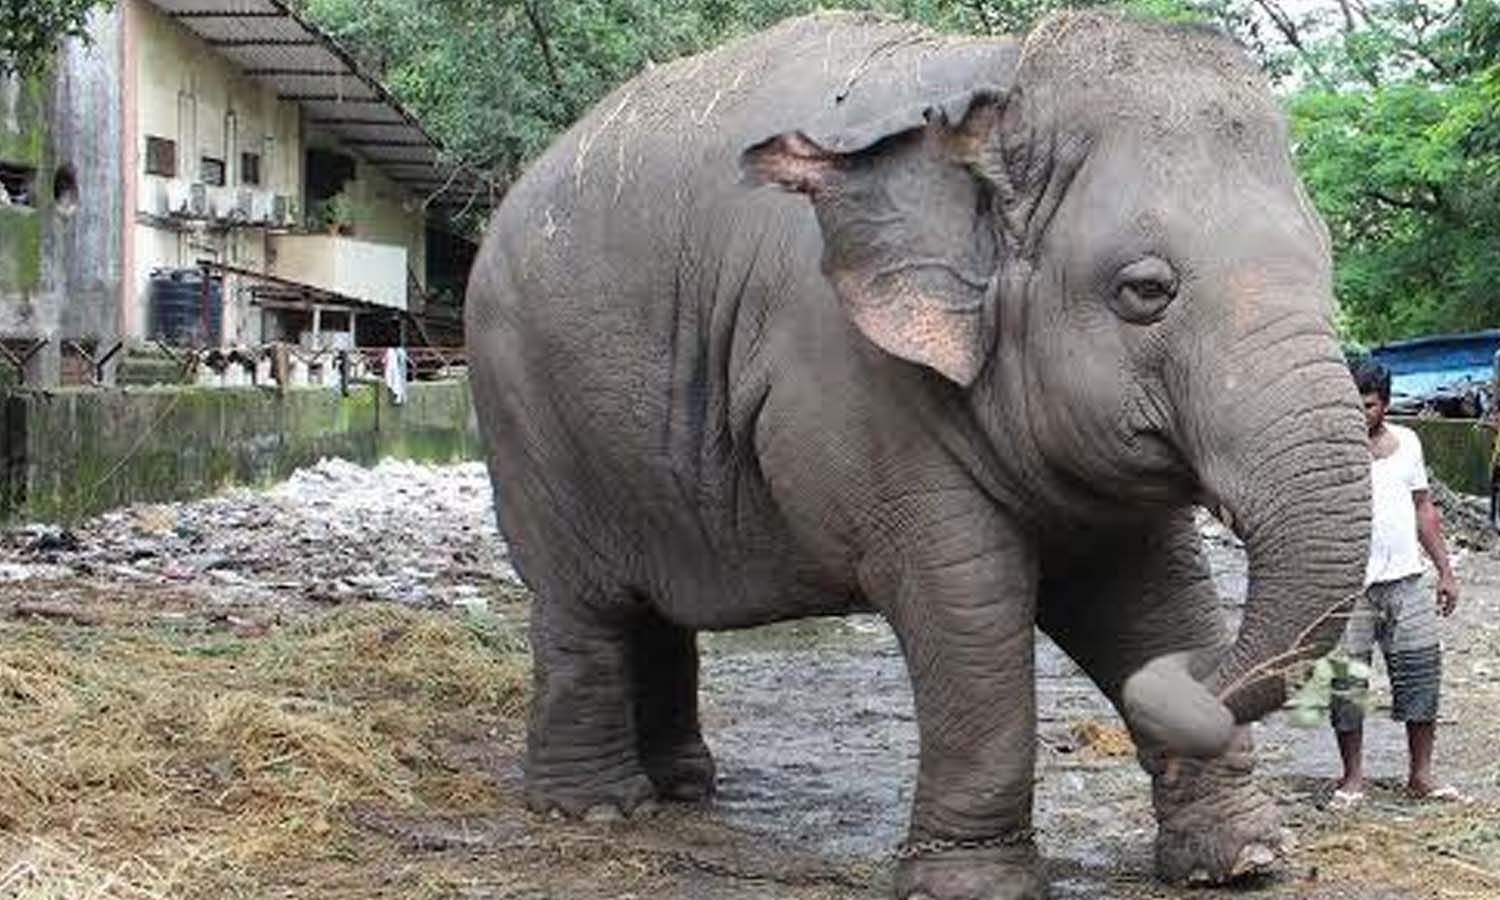 People from all over the world are uniting to help elephants in India through a unique initiative called the 30 Mile Walk Challenge